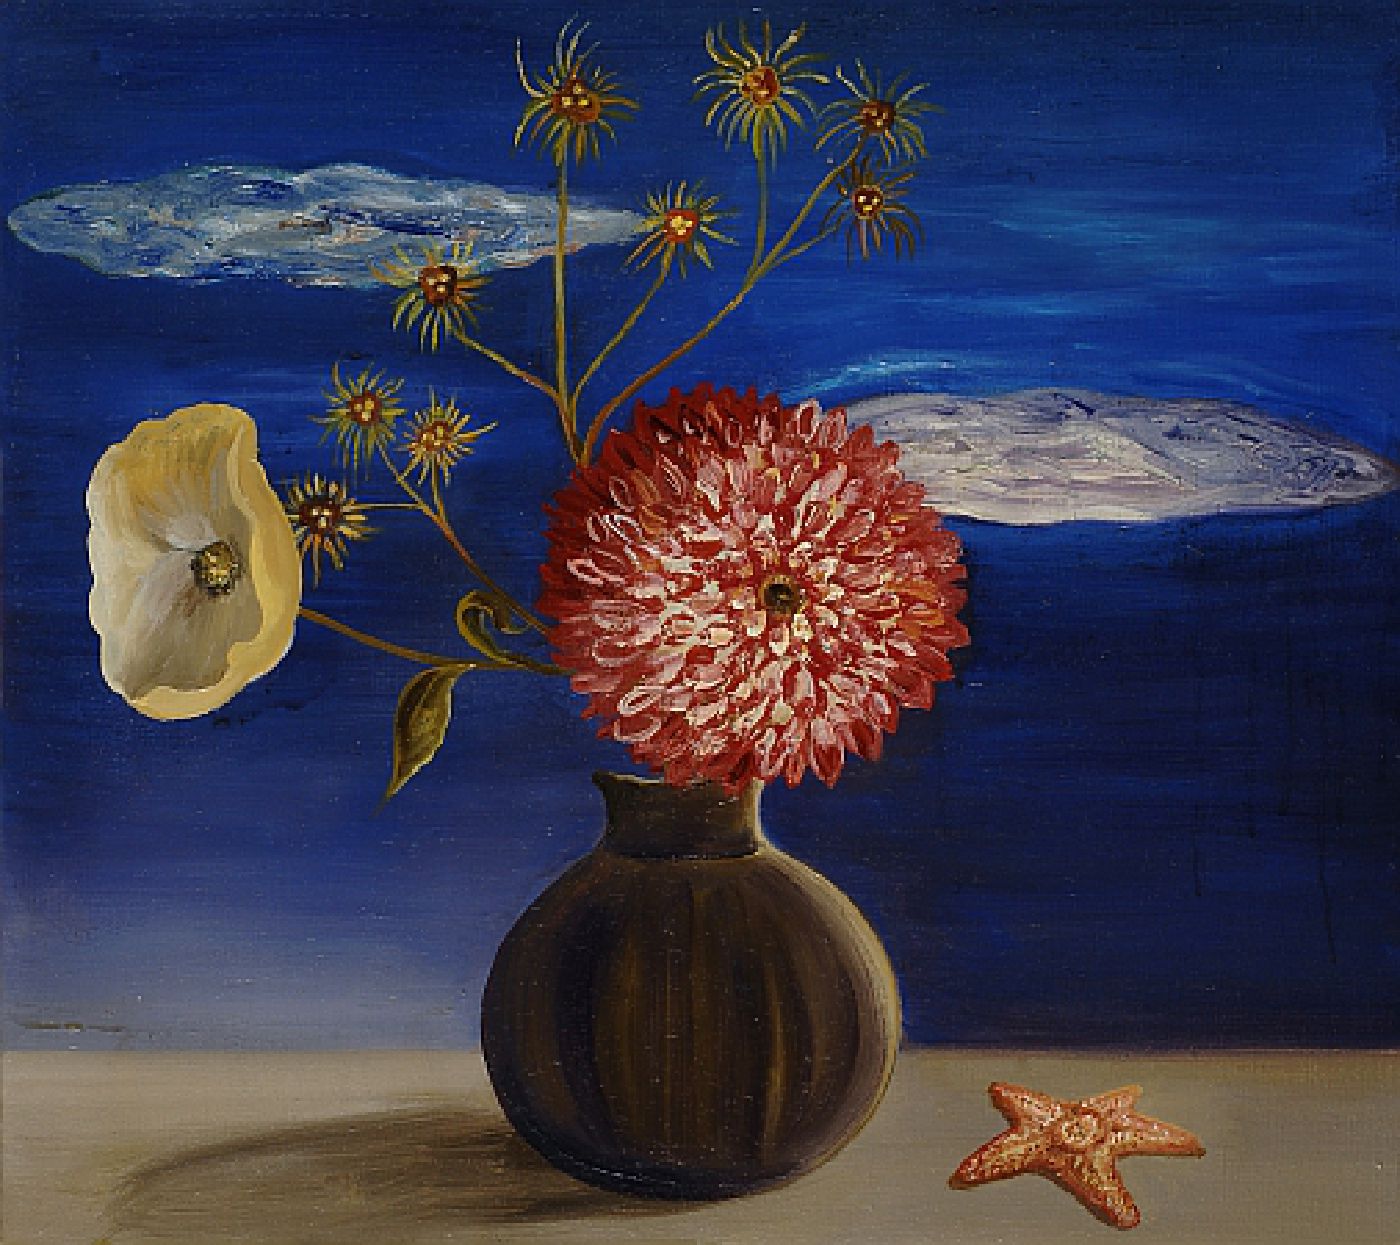 Big Red Flower with Very Blue Sky - Oil on linen